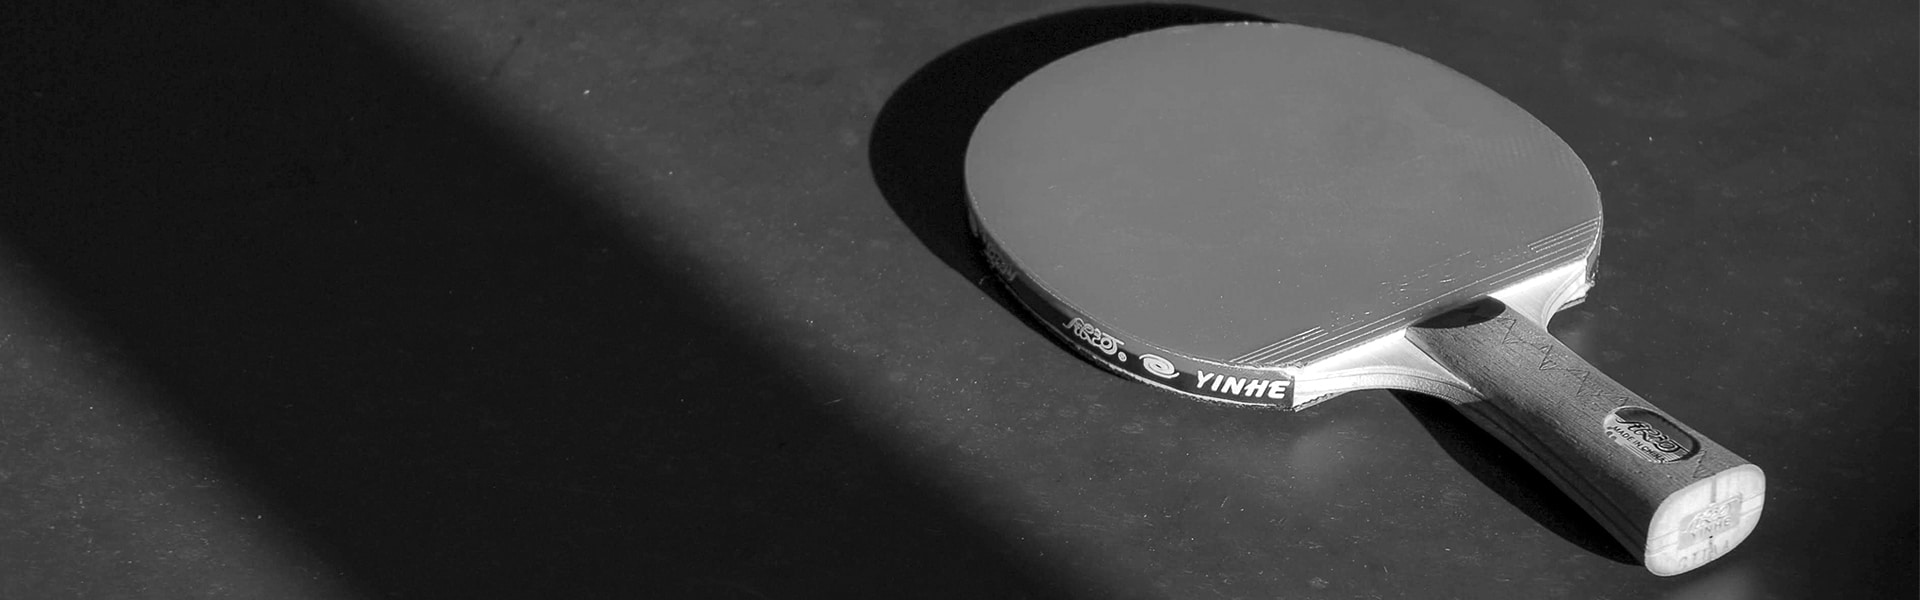 Ping Pong Paddle Against Black Background